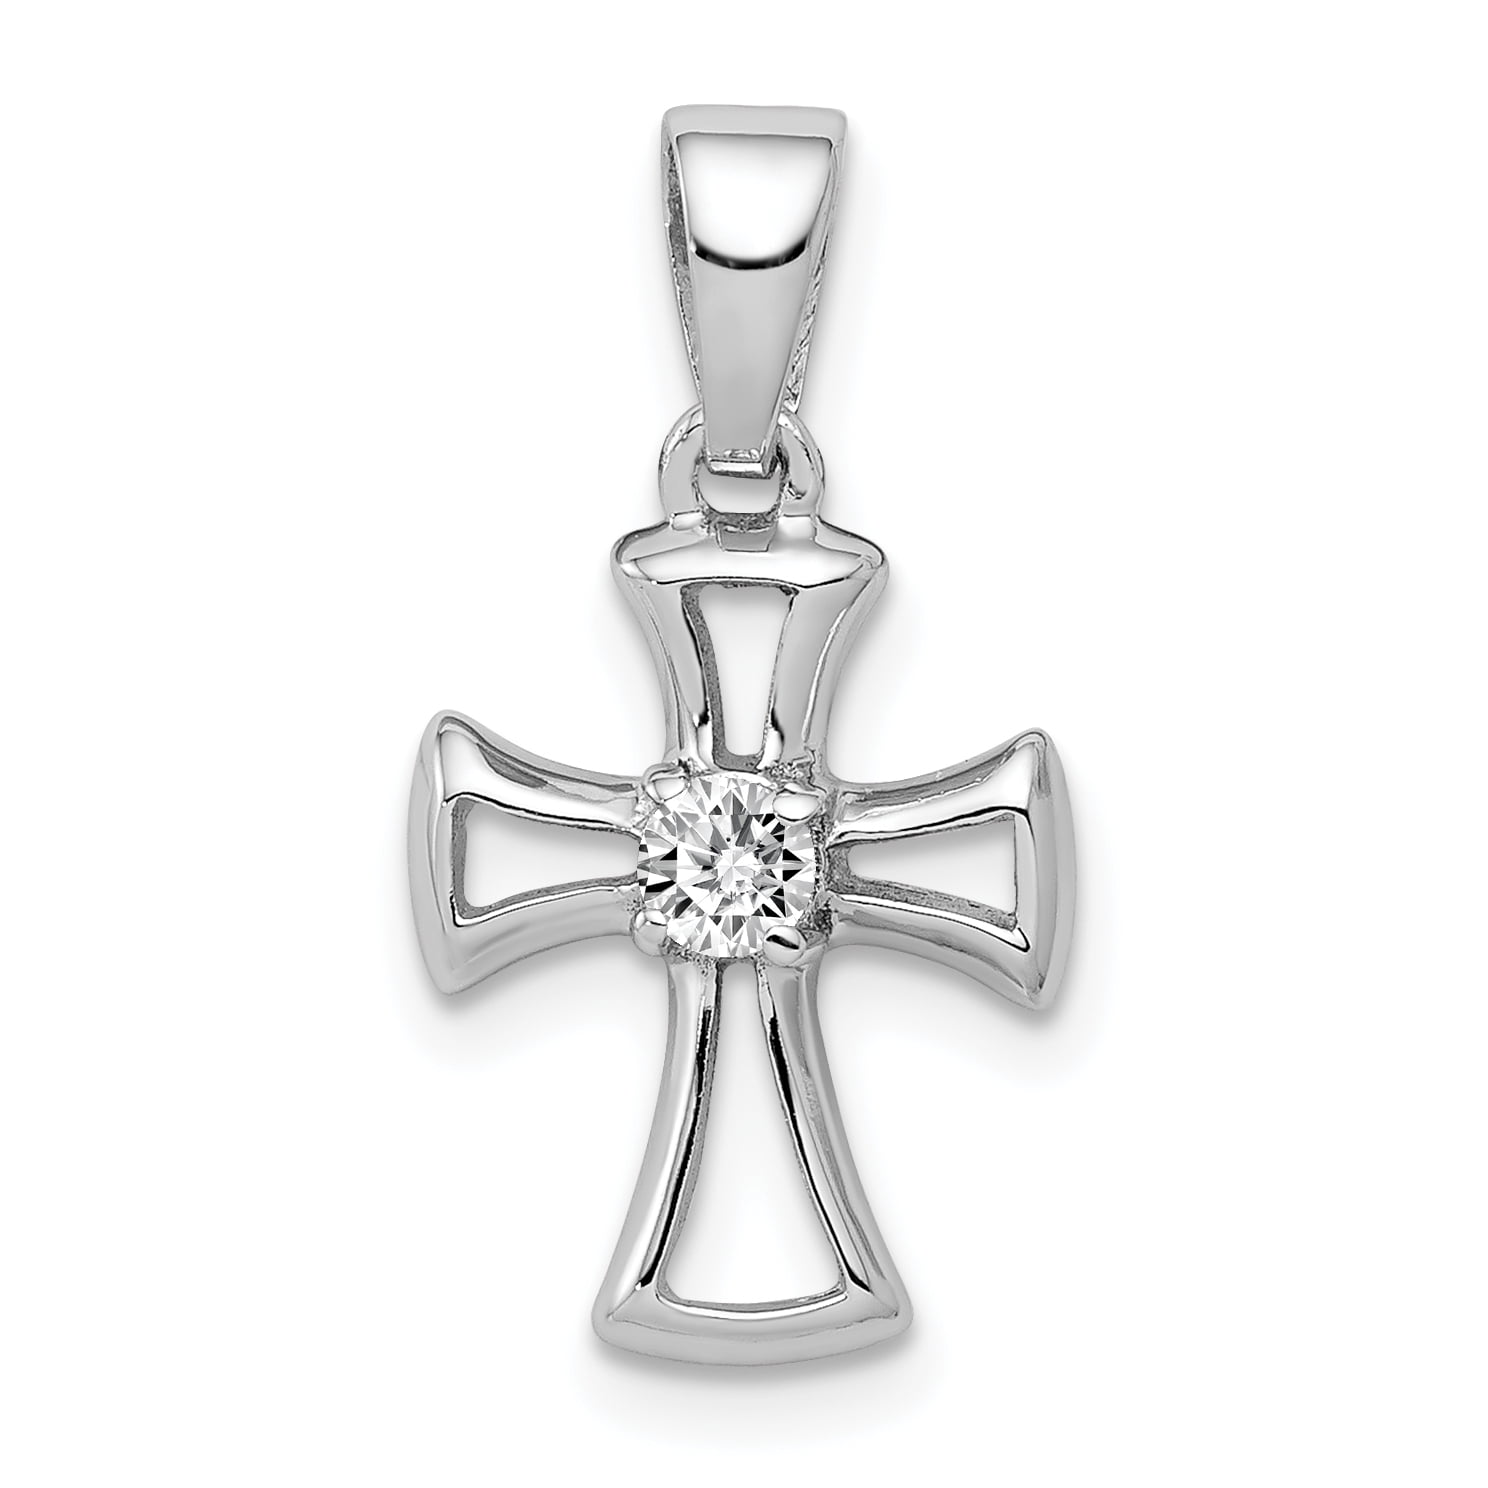 Cubic Zirconia 925 Sterling Silver CZ Latin Relgious Cross Pendant